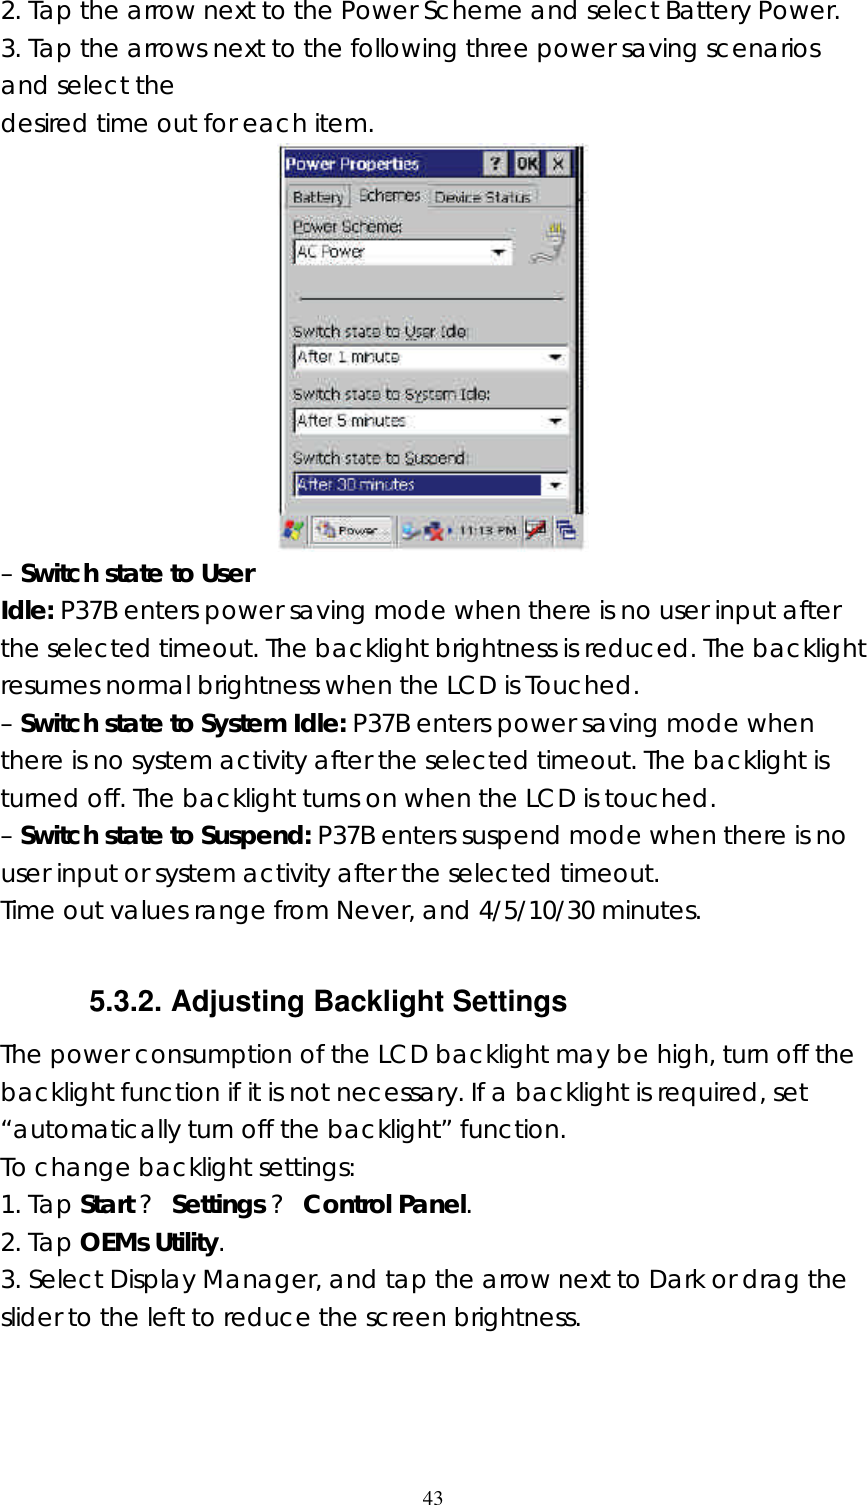  432. Tap the arrow next to the Power Scheme and select Battery Power. 3. Tap the arrows next to the following three power saving scenarios and select the desired time out for each item.  – Switch state to User Idle: P37B enters power saving mode when there is no user input after the selected timeout. The backlight brightness is reduced. The backlight resumes normal brightness when the LCD is Touched. – Switch state to System Idle: P37B enters power saving mode when there is no system activity after the selected timeout. The backlight is turned off. The backlight turns on when the LCD is touched. – Switch state to Suspend: P37B enters suspend mode when there is no user input or system activity after the selected timeout. Time out values range from Never, and 4/5/10/30 minutes.  5.3.2. Adjusting Backlight Settings The power consumption of the LCD backlight may be high, turn off the backlight function if it is not necessary. If a backlight is required, set “automatically turn off the backlight” function. To change backlight settings: 1. Tap Start ? Settings ? Control Panel. 2. Tap OEMs Utility. 3. Select Display Manager, and tap the arrow next to Dark or drag the slider to the left to reduce the screen brightness. 